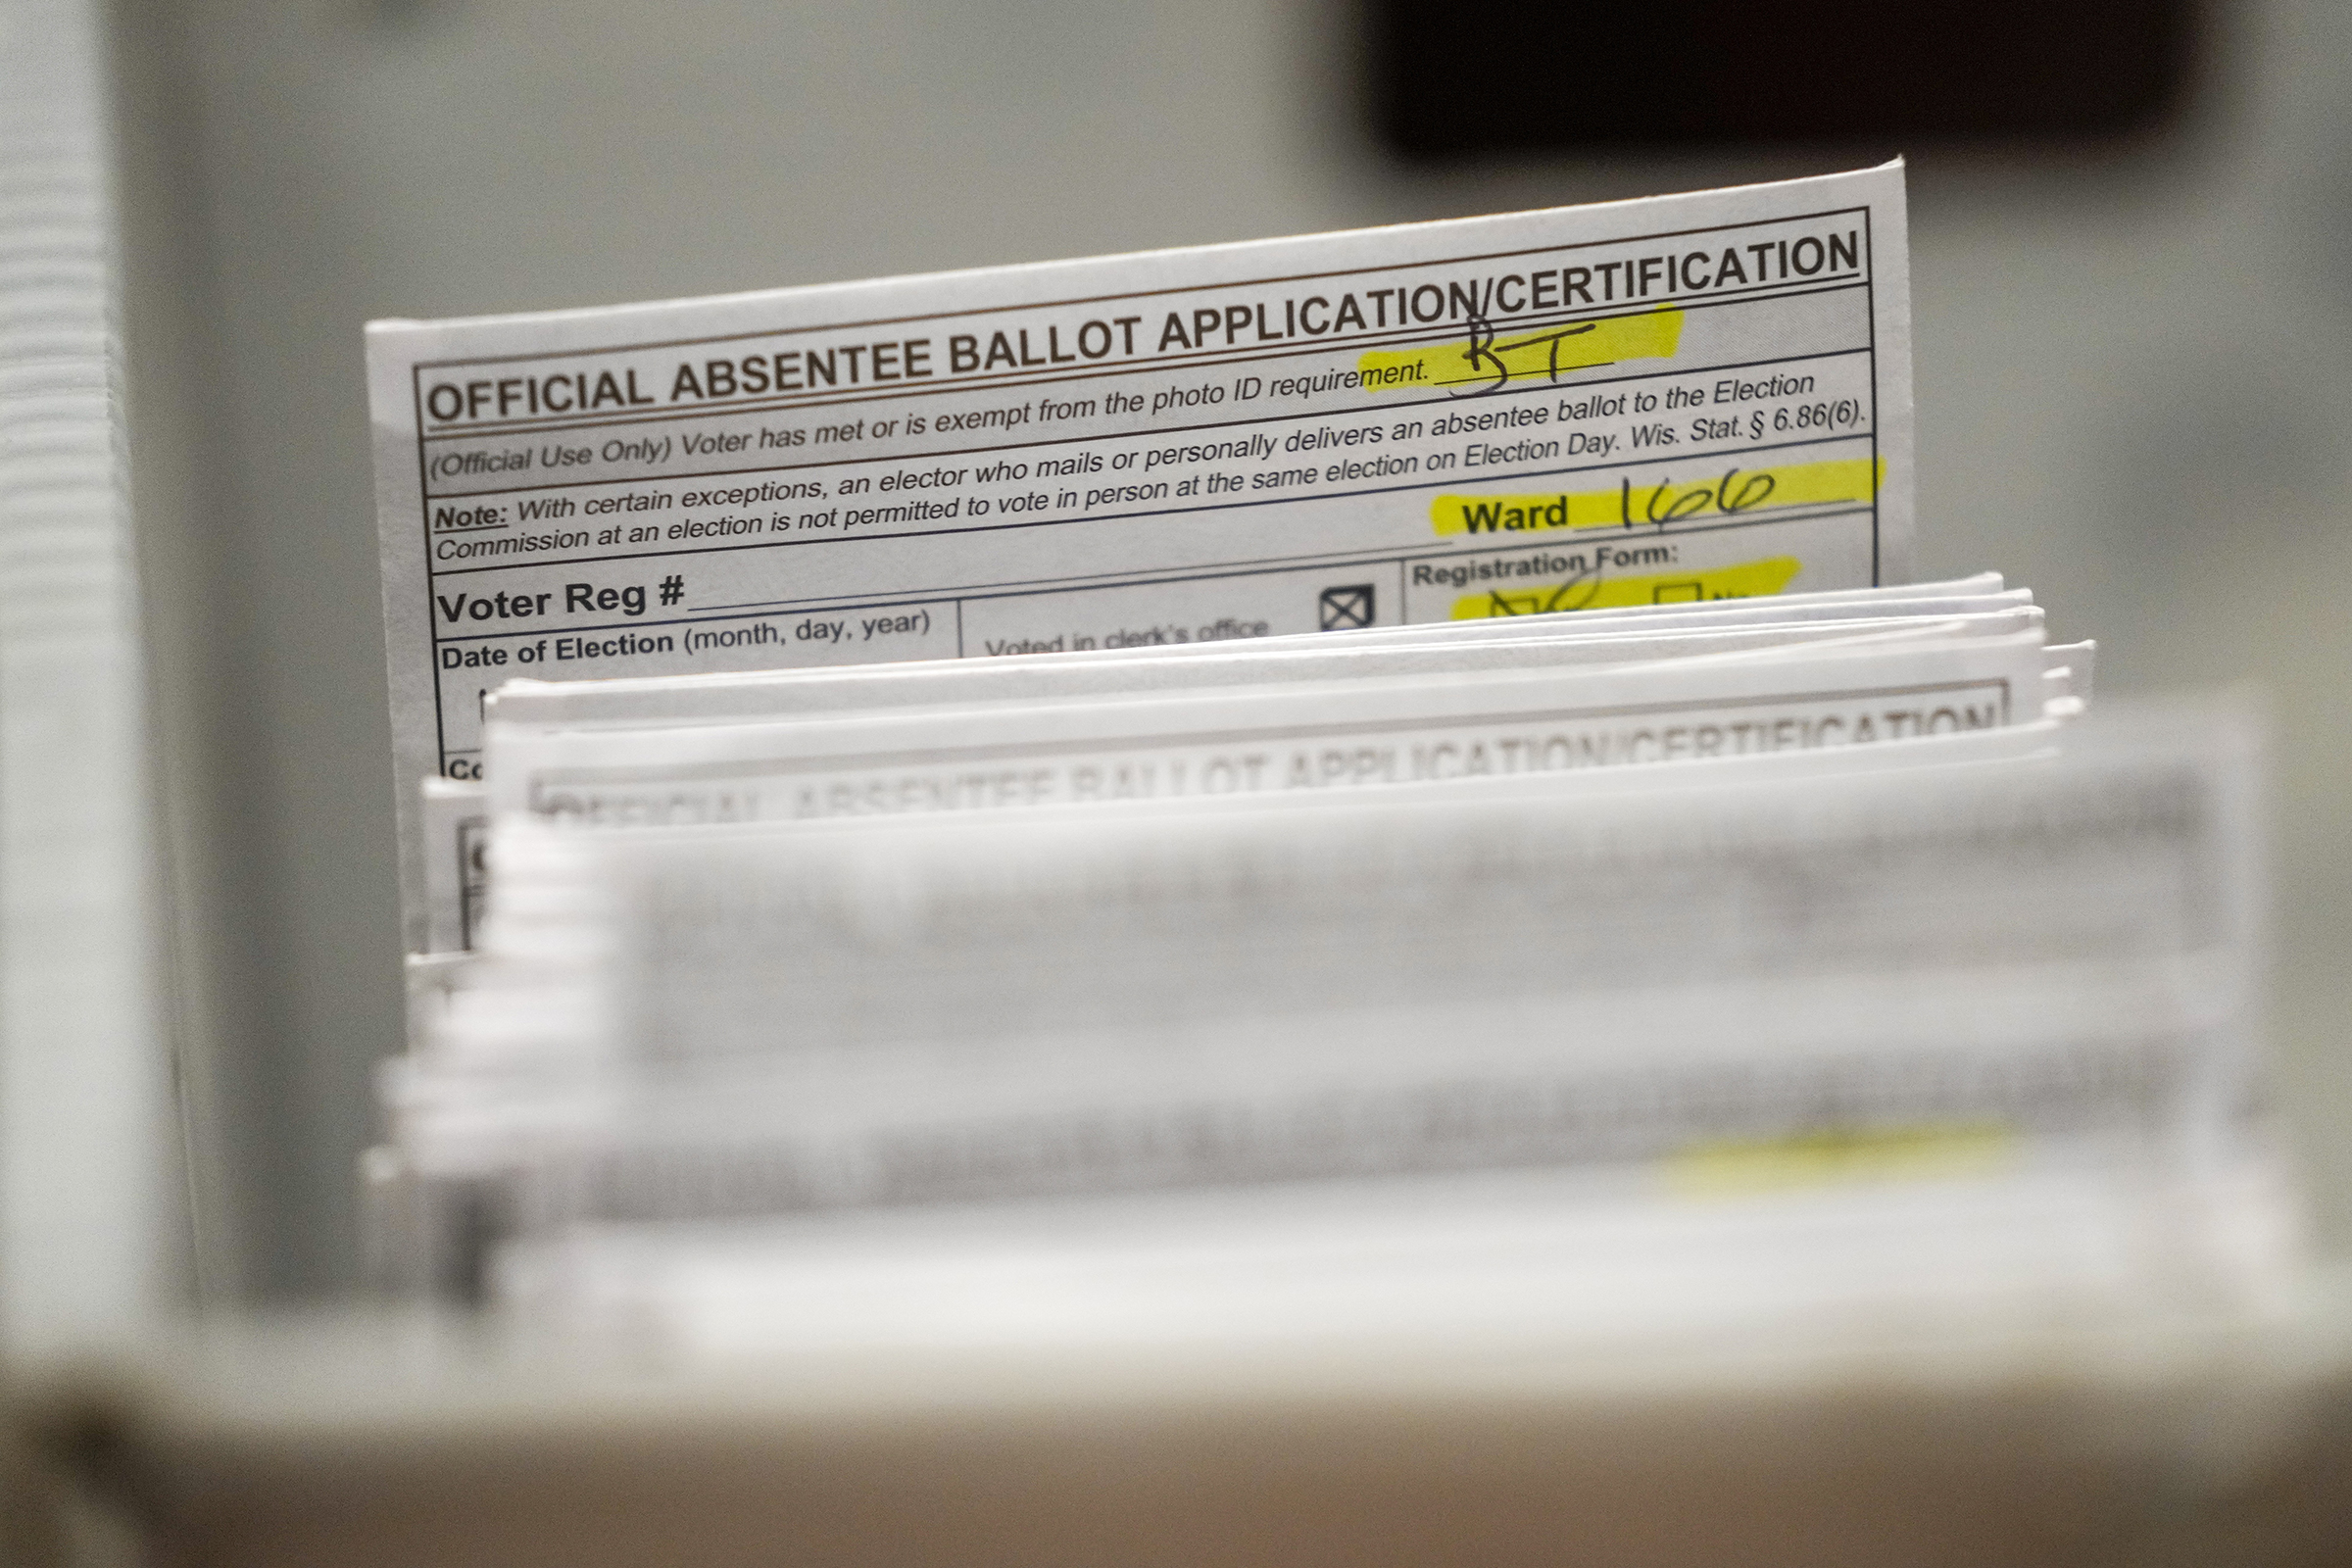 Circuit court judge hears arguments about making ban on ‘ballot spoiling’ permanent